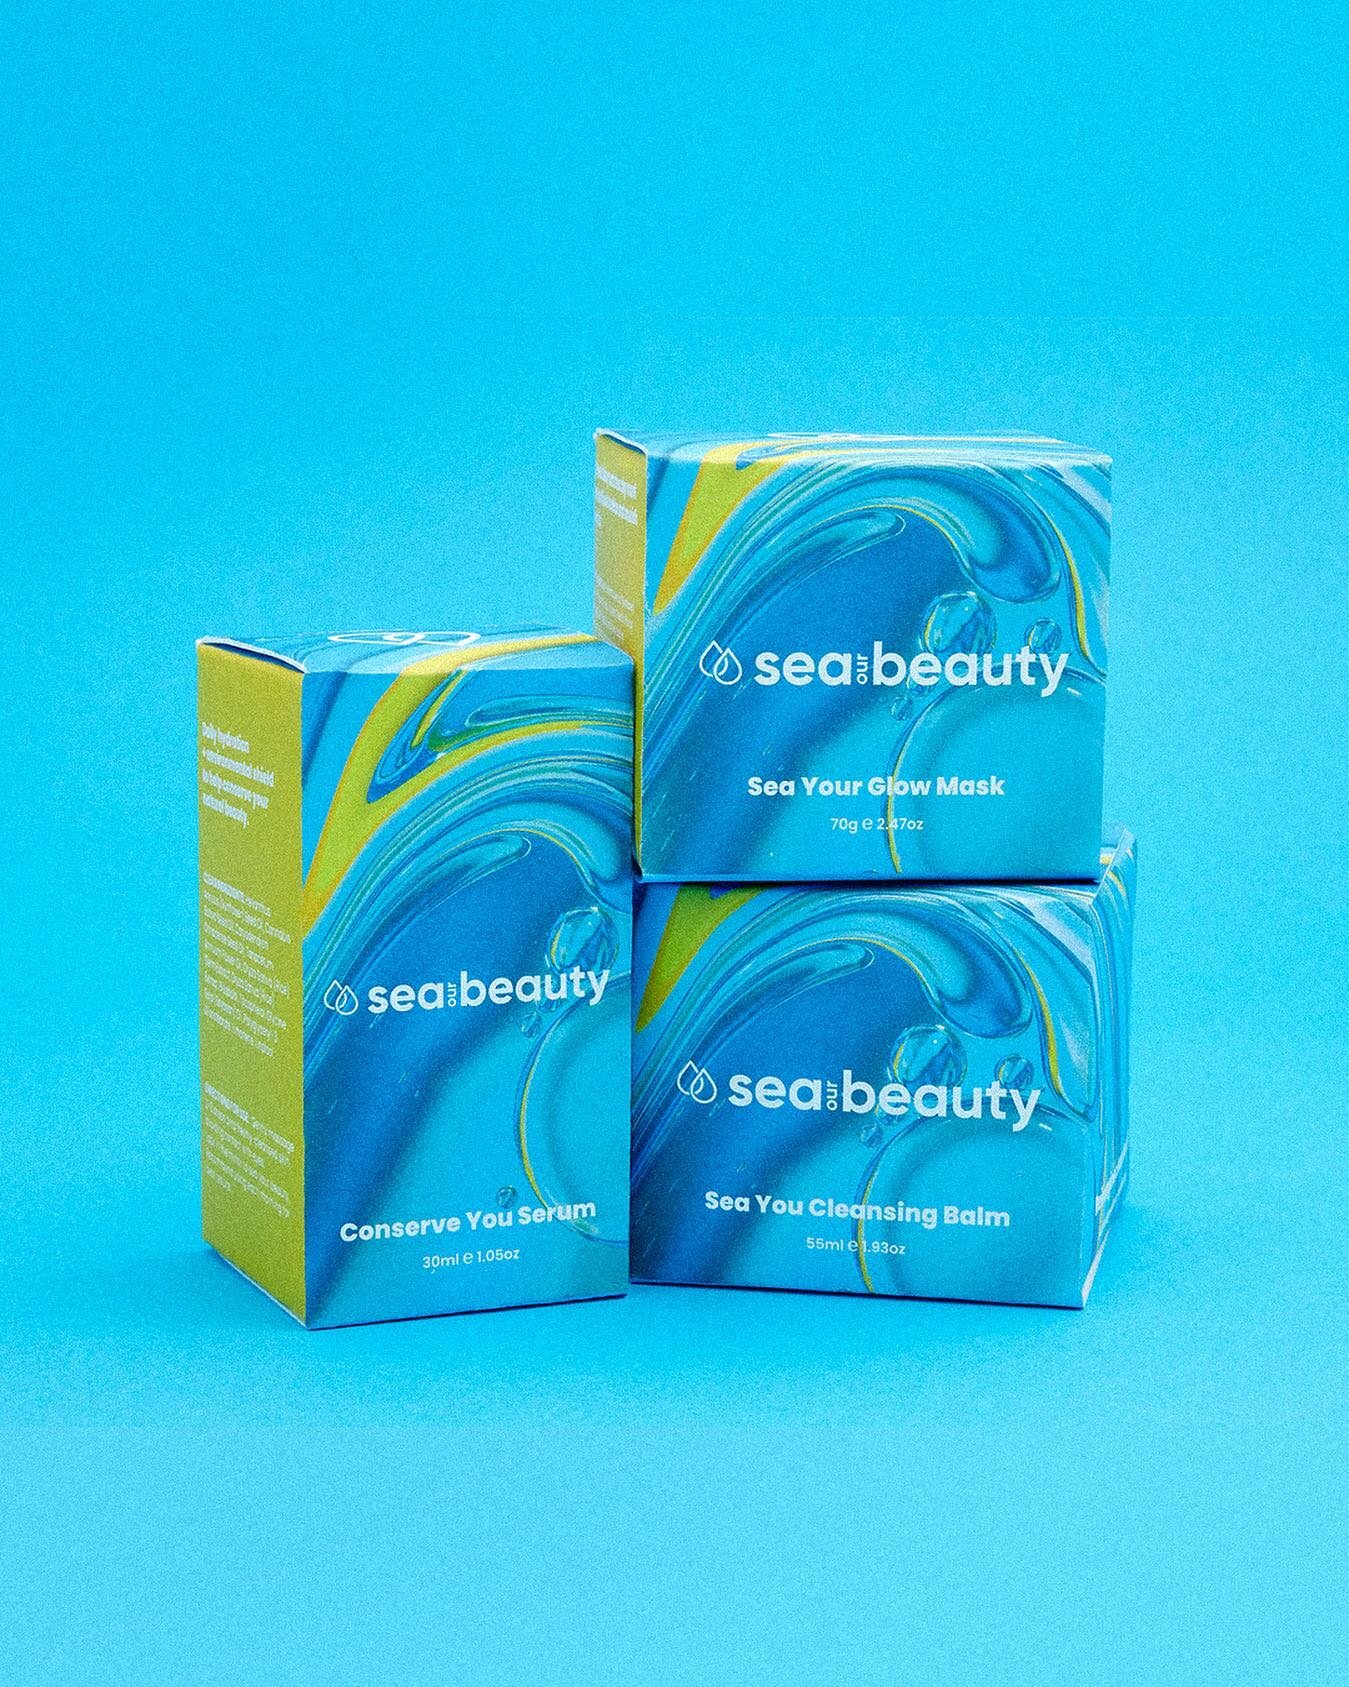 Packaging design created for @conservingbeauty 
Pattern created from oil with water illuminated by coloured light &amp; warped in postproduction. (Before rebrand)
#packagedesign #packaging #branding #makeup #beautyproducts